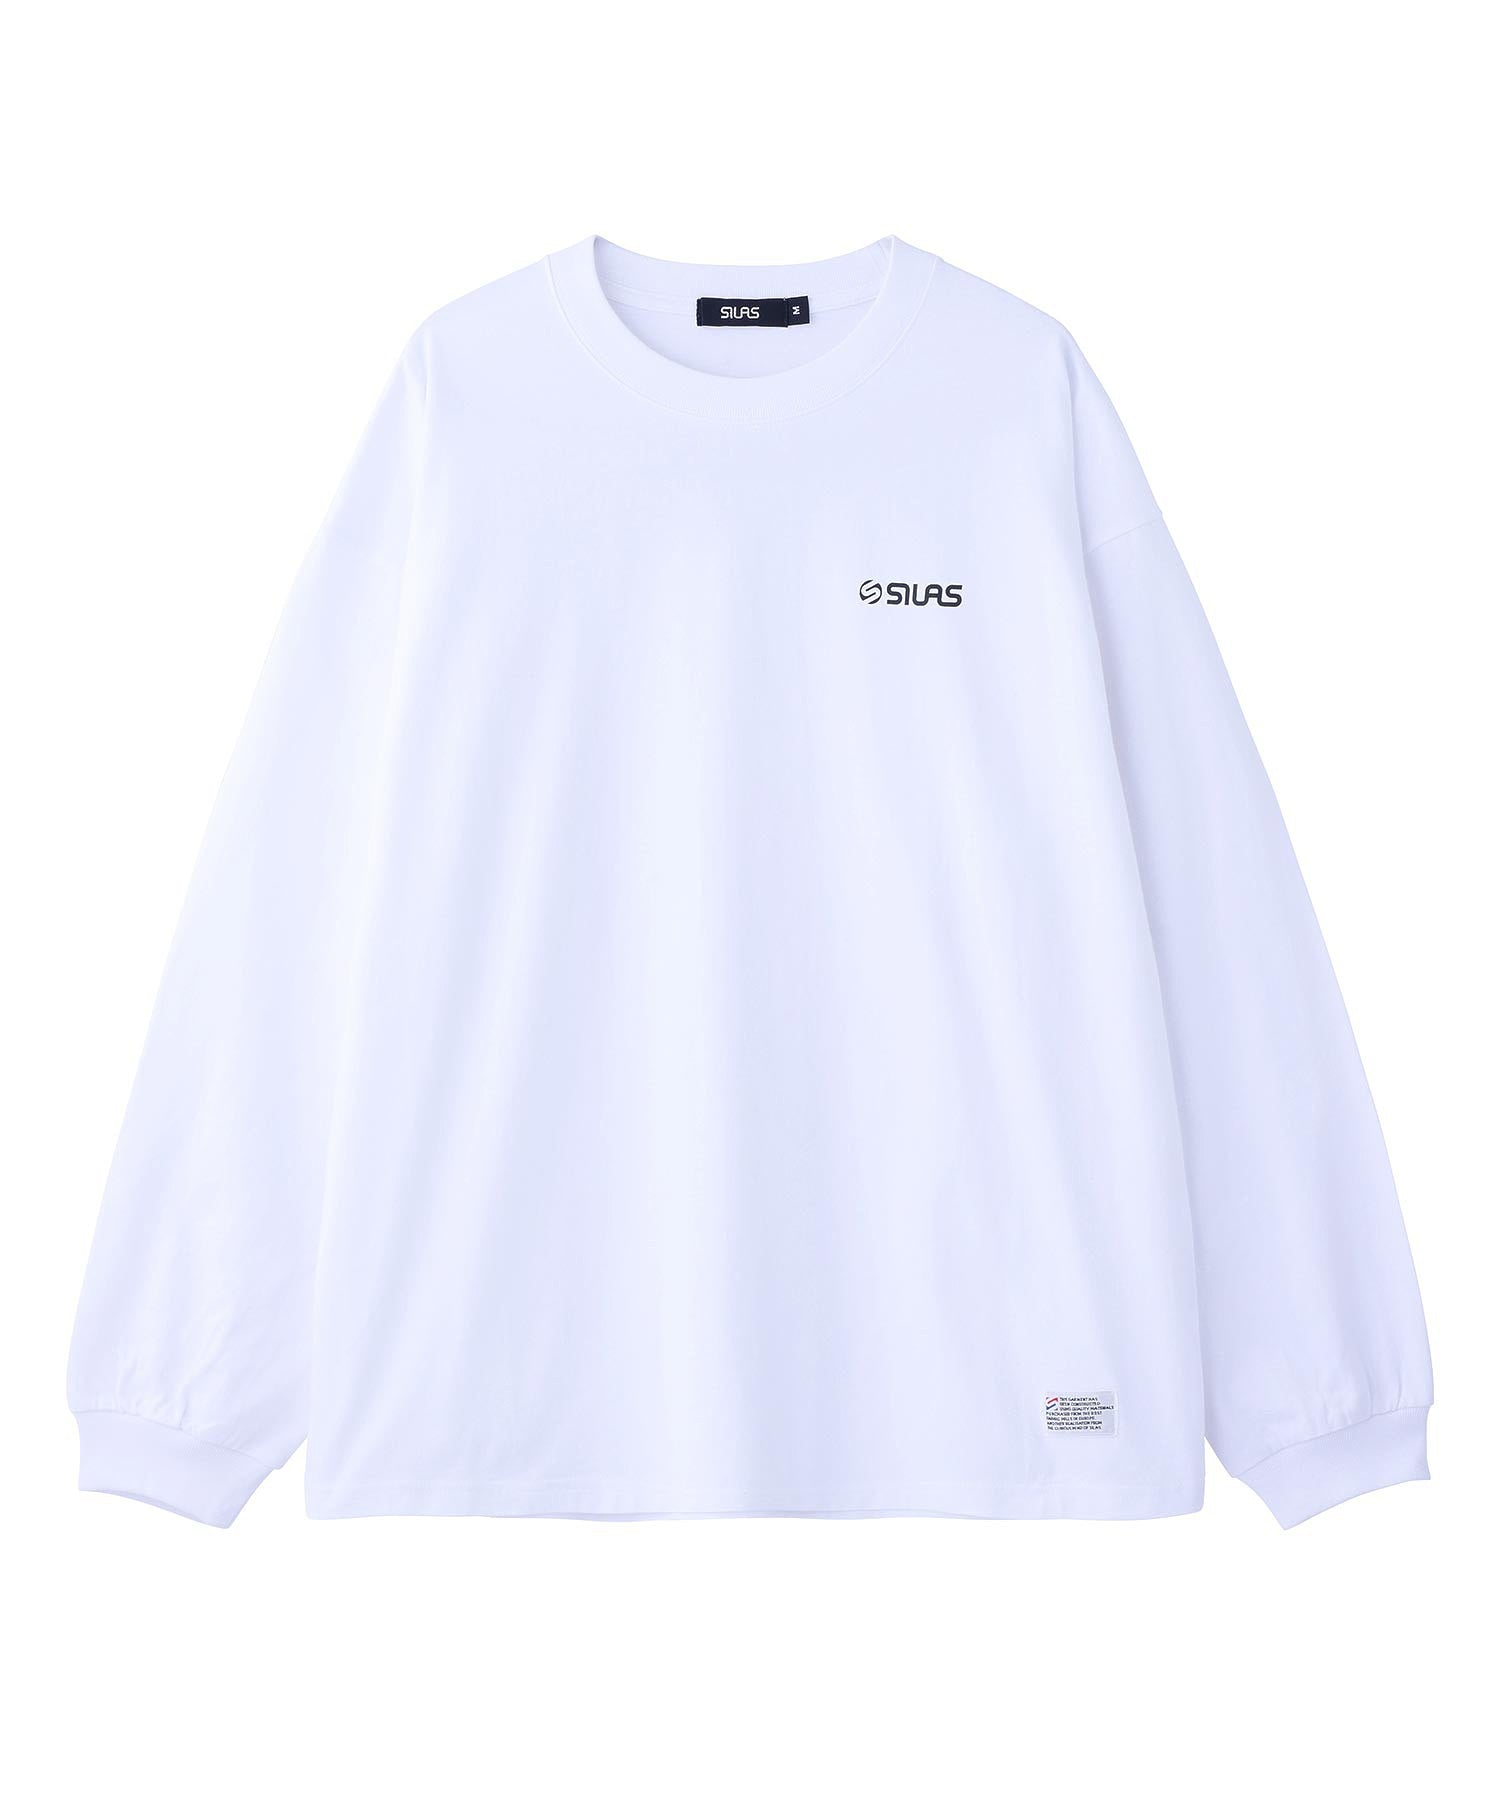 OLD LOGO WIDE L/S TEE SILAS